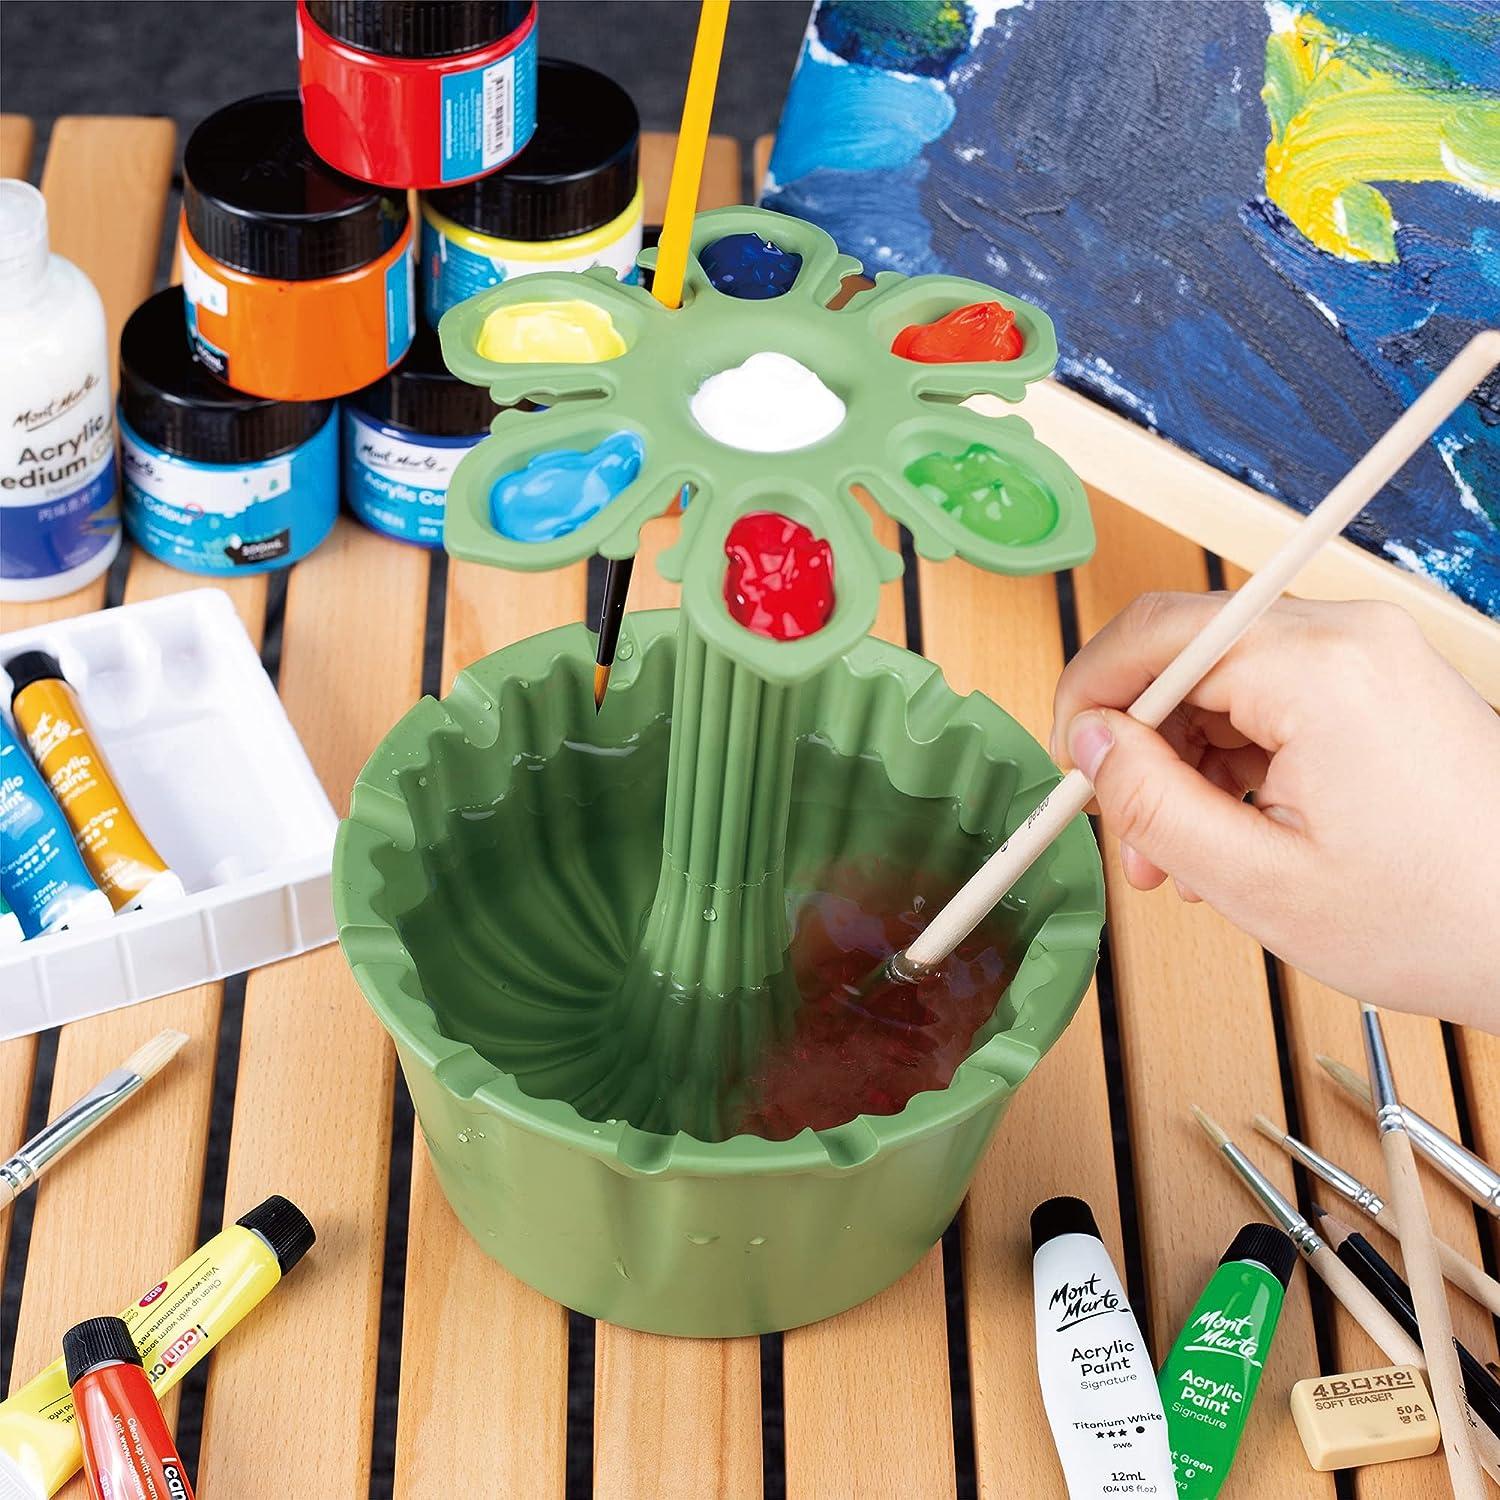 1pc Three-in-one Palette Color Box And Brush Washing Bucket Art Set, With Paint  Brush Organizer, Palette Box And Brush Cleaner